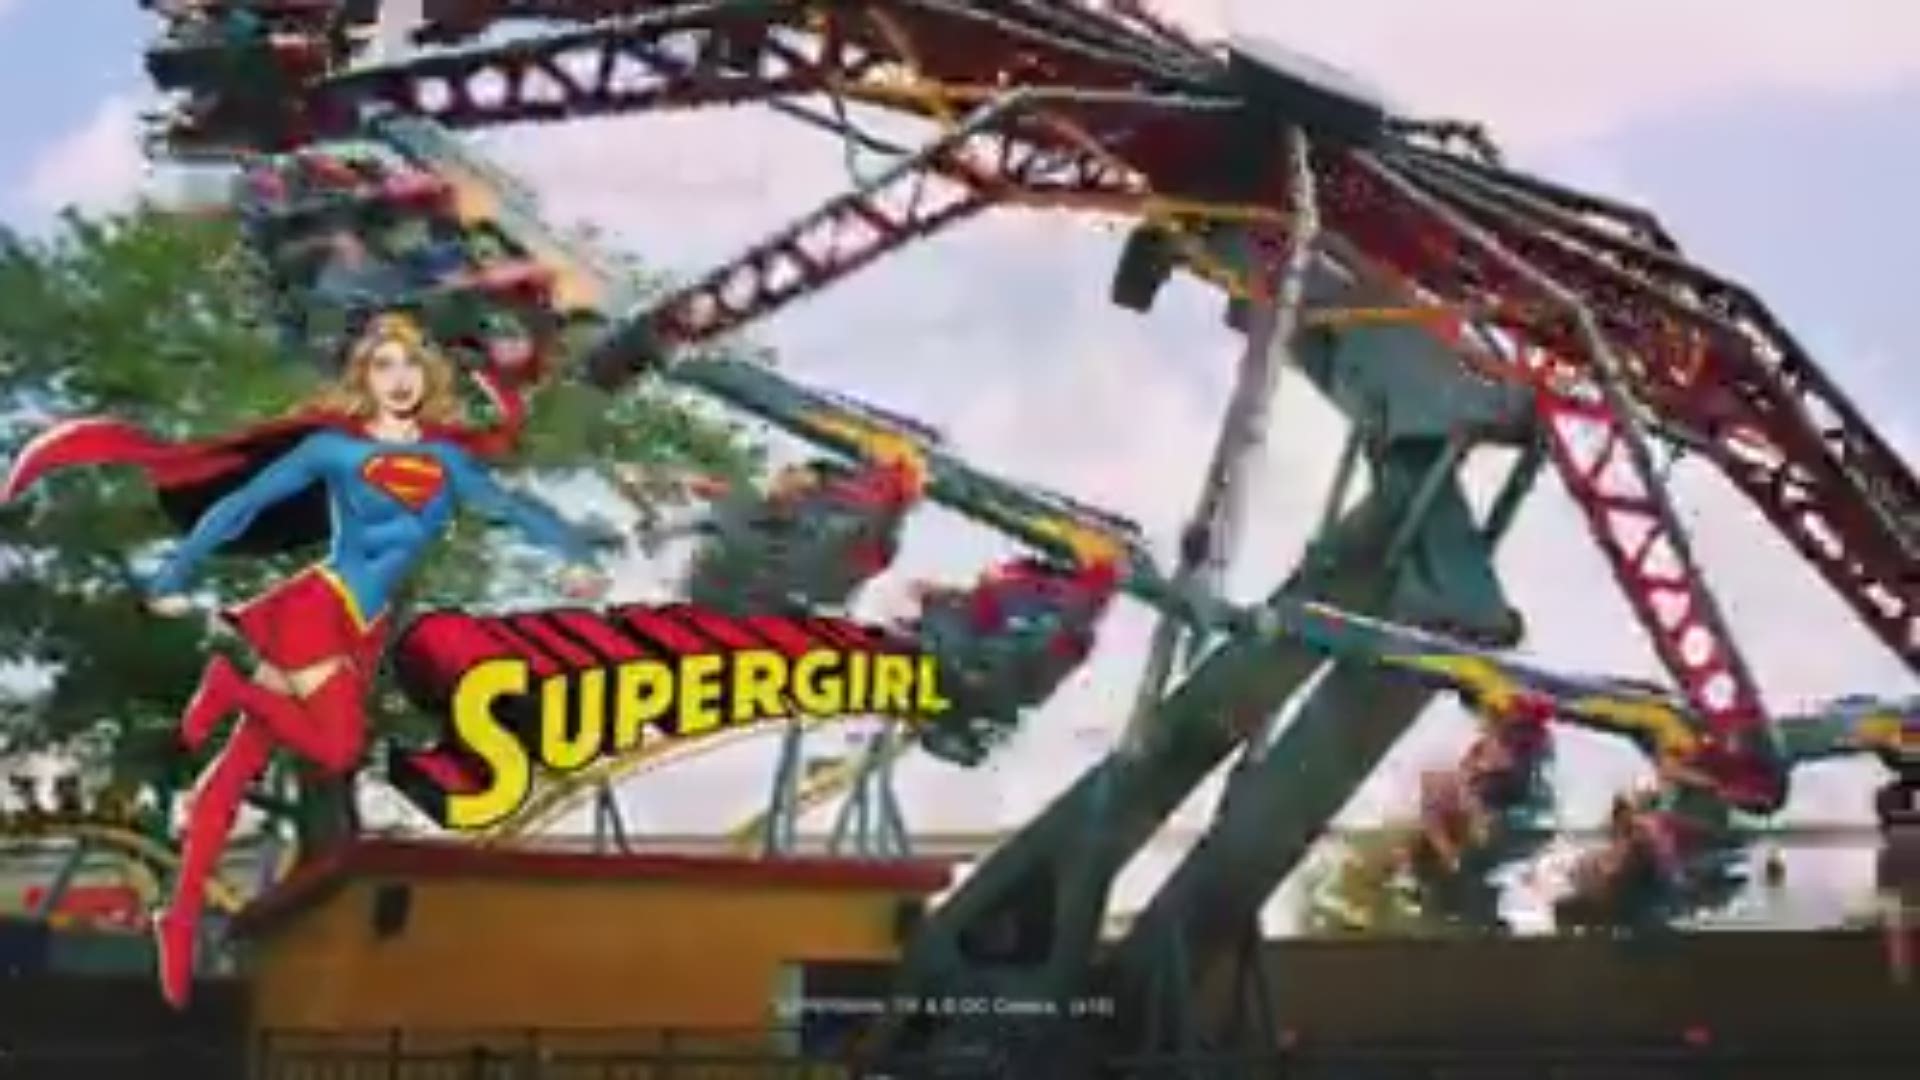 WATCH: Supergirl thrill ride at Six Flags St. Louis | www.semashow.com